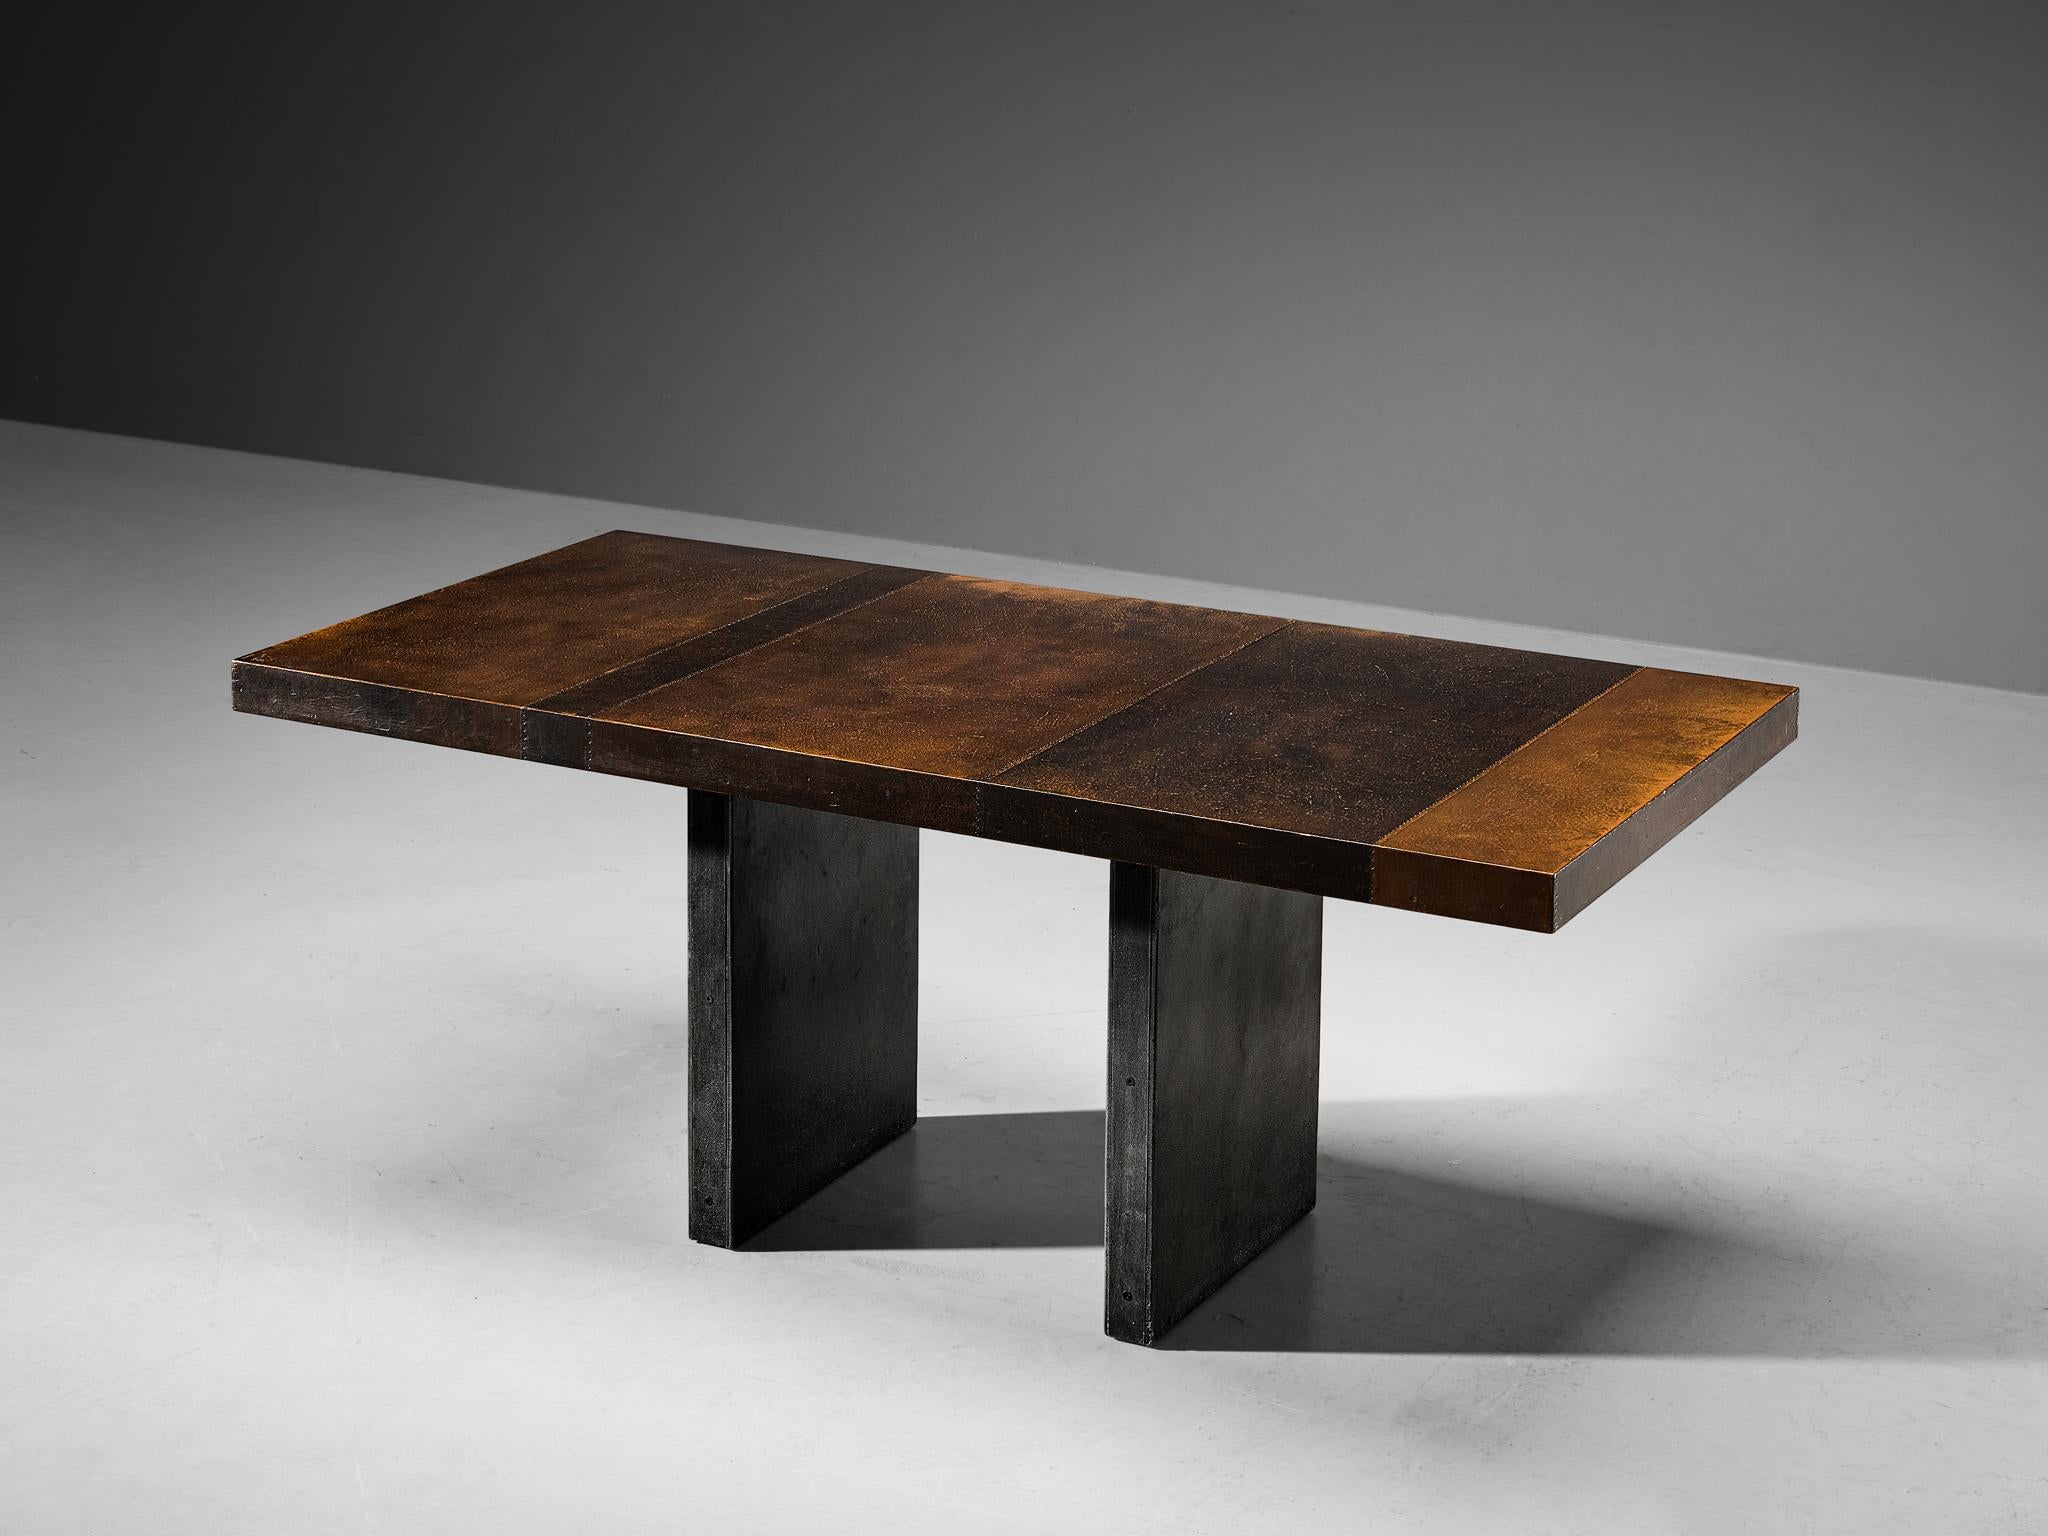 Lorenzo Burchiellaro, dining table, copper and coated wood, Italy, 1970s.

This table is an absolute eye-catcher. The copper is in beautiful, patinated condition and the vibrant yet natural oxidation and golden color is something out of this world.